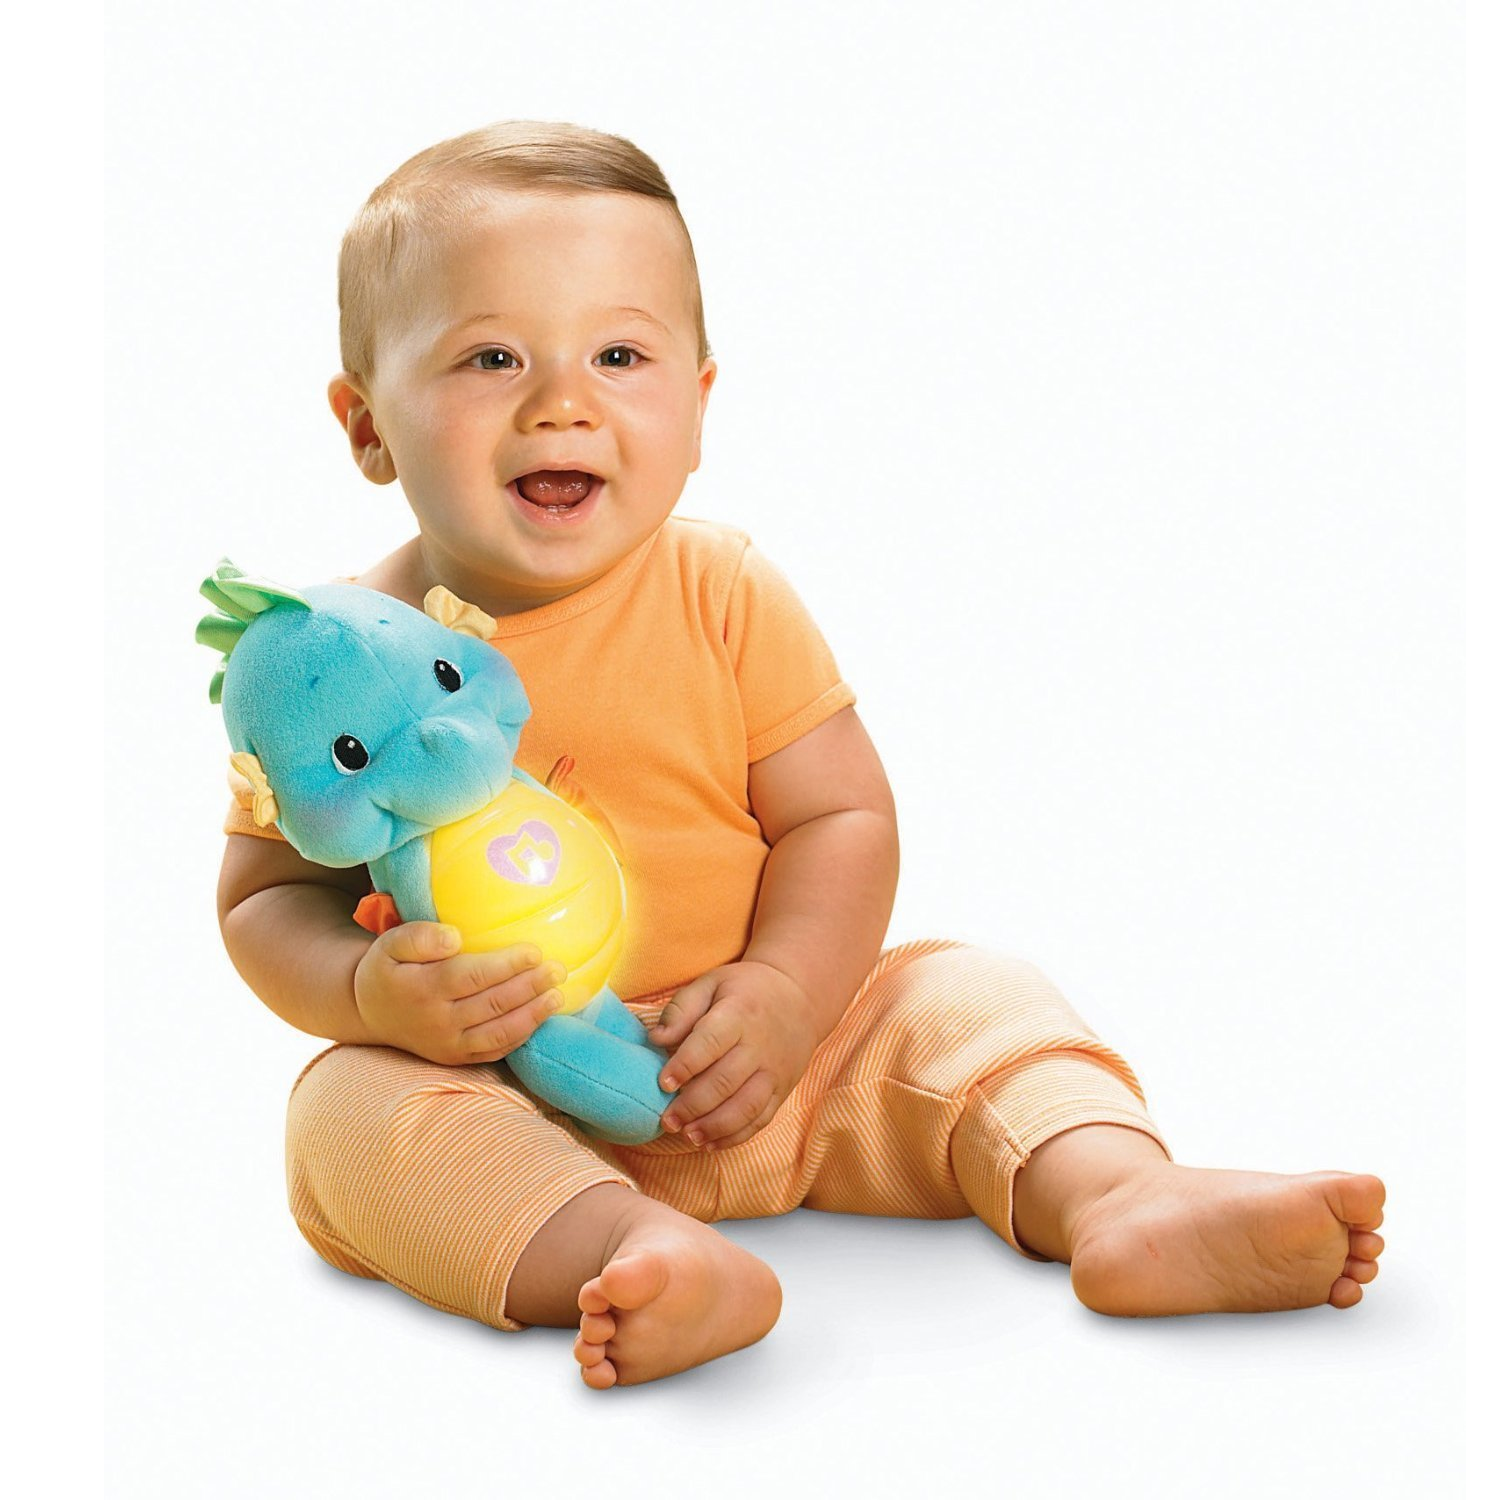 Fisher-Price Soothe and Glow Seahorse, Blue Just $9.59! (Reg $15.99) Lowest Price Seen!